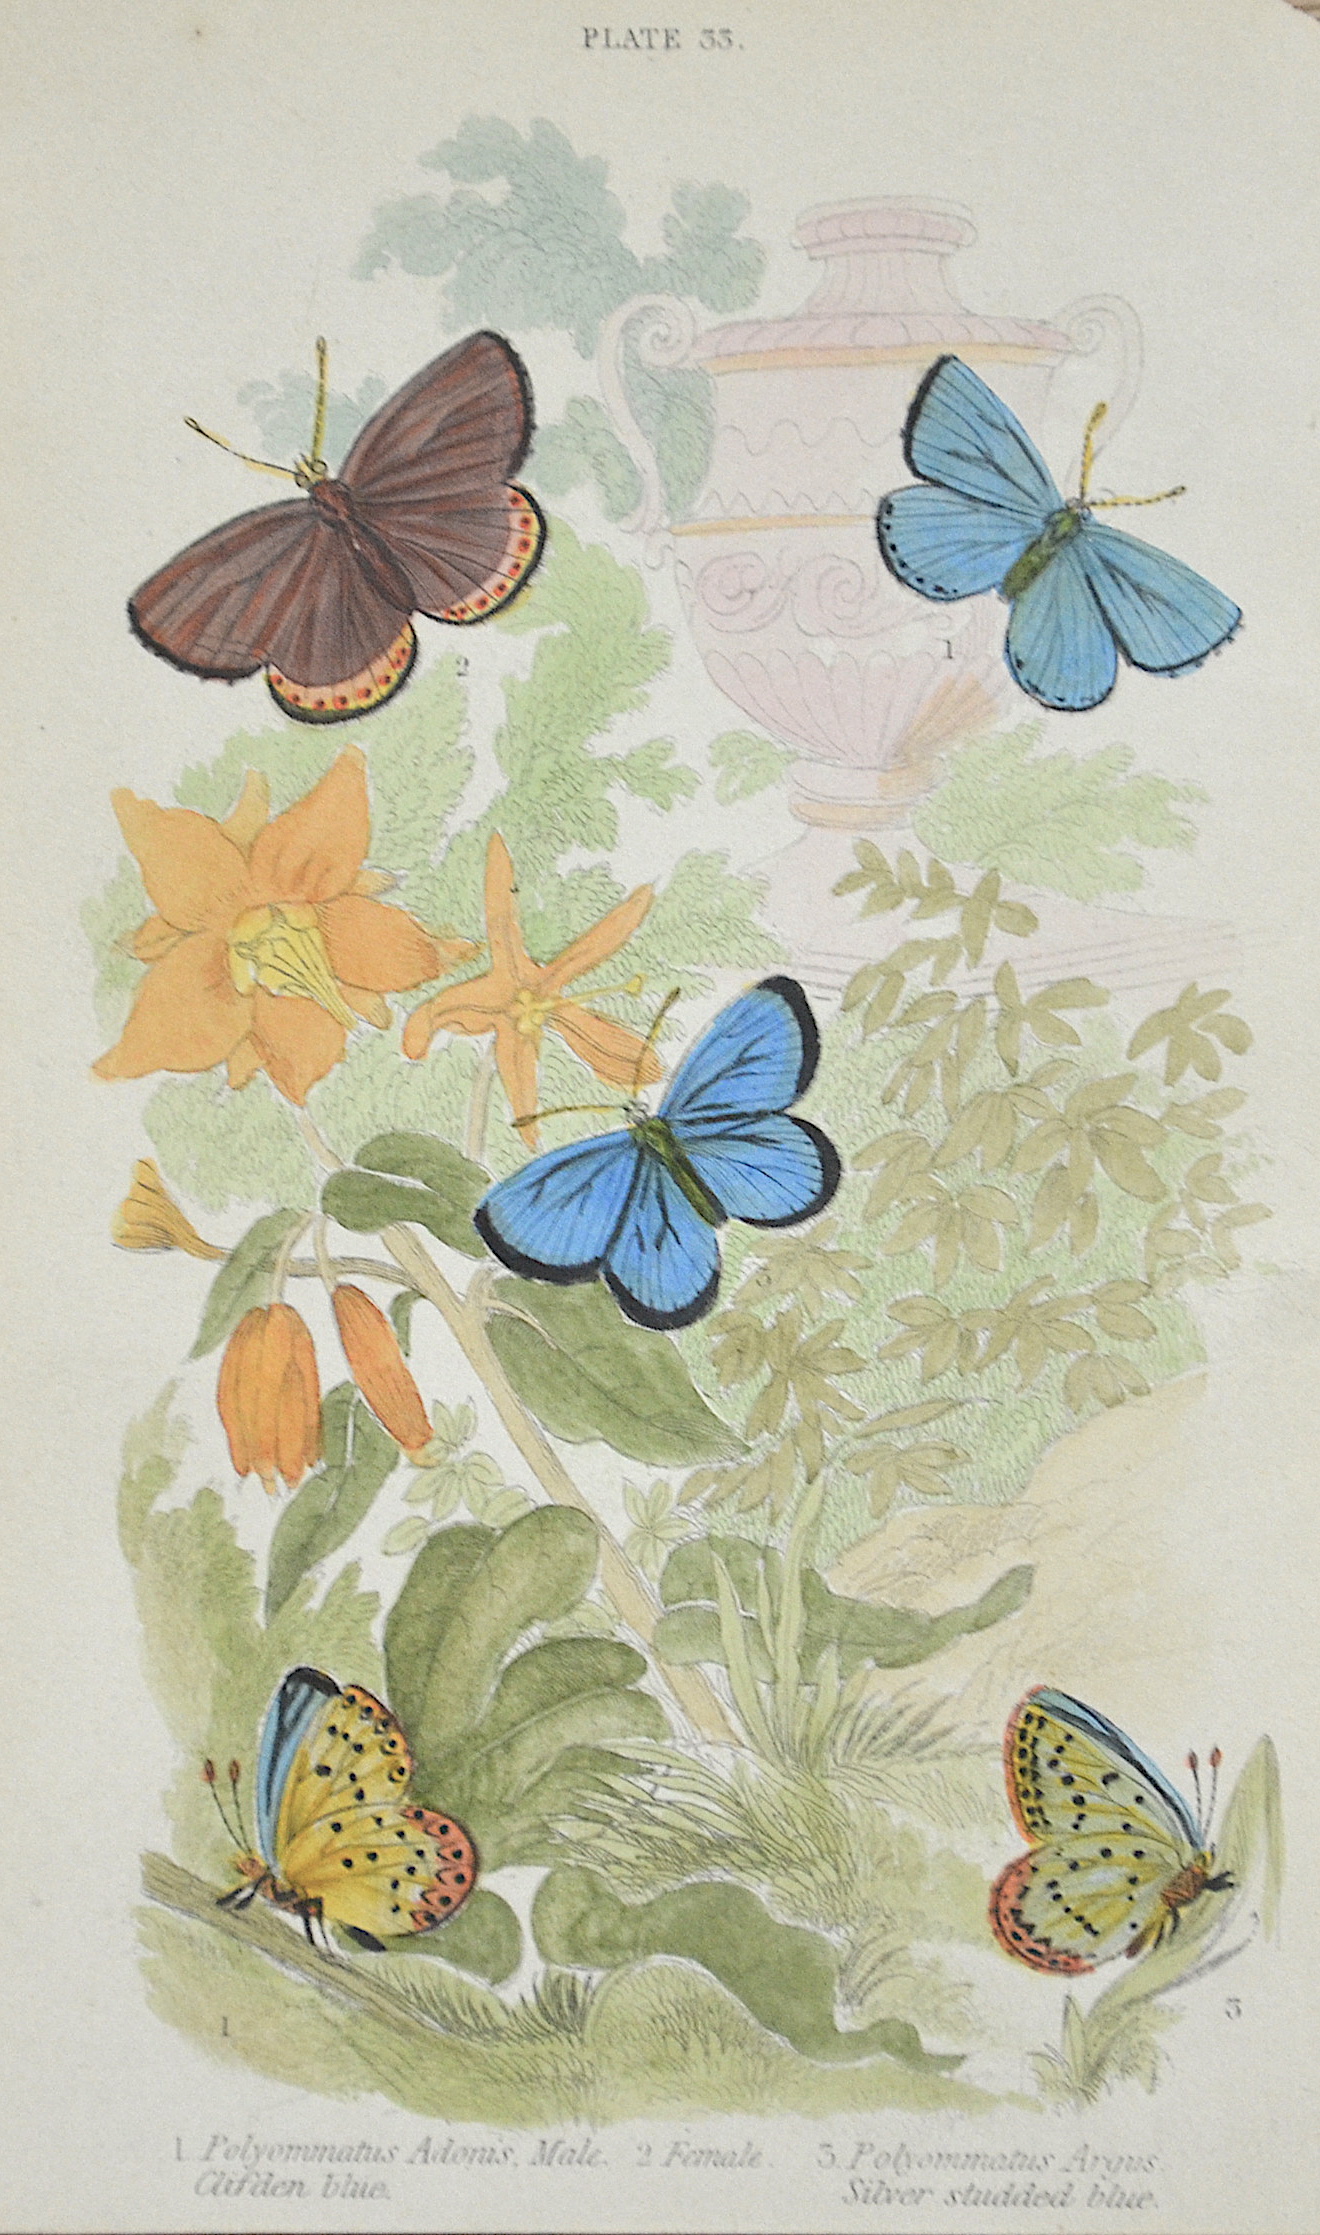 Duncan  Plate 33. 1. Polyommatus Adonis, Male Clifden blue. 2. Female. 3. Polyommatus Argus Silver studded blue.